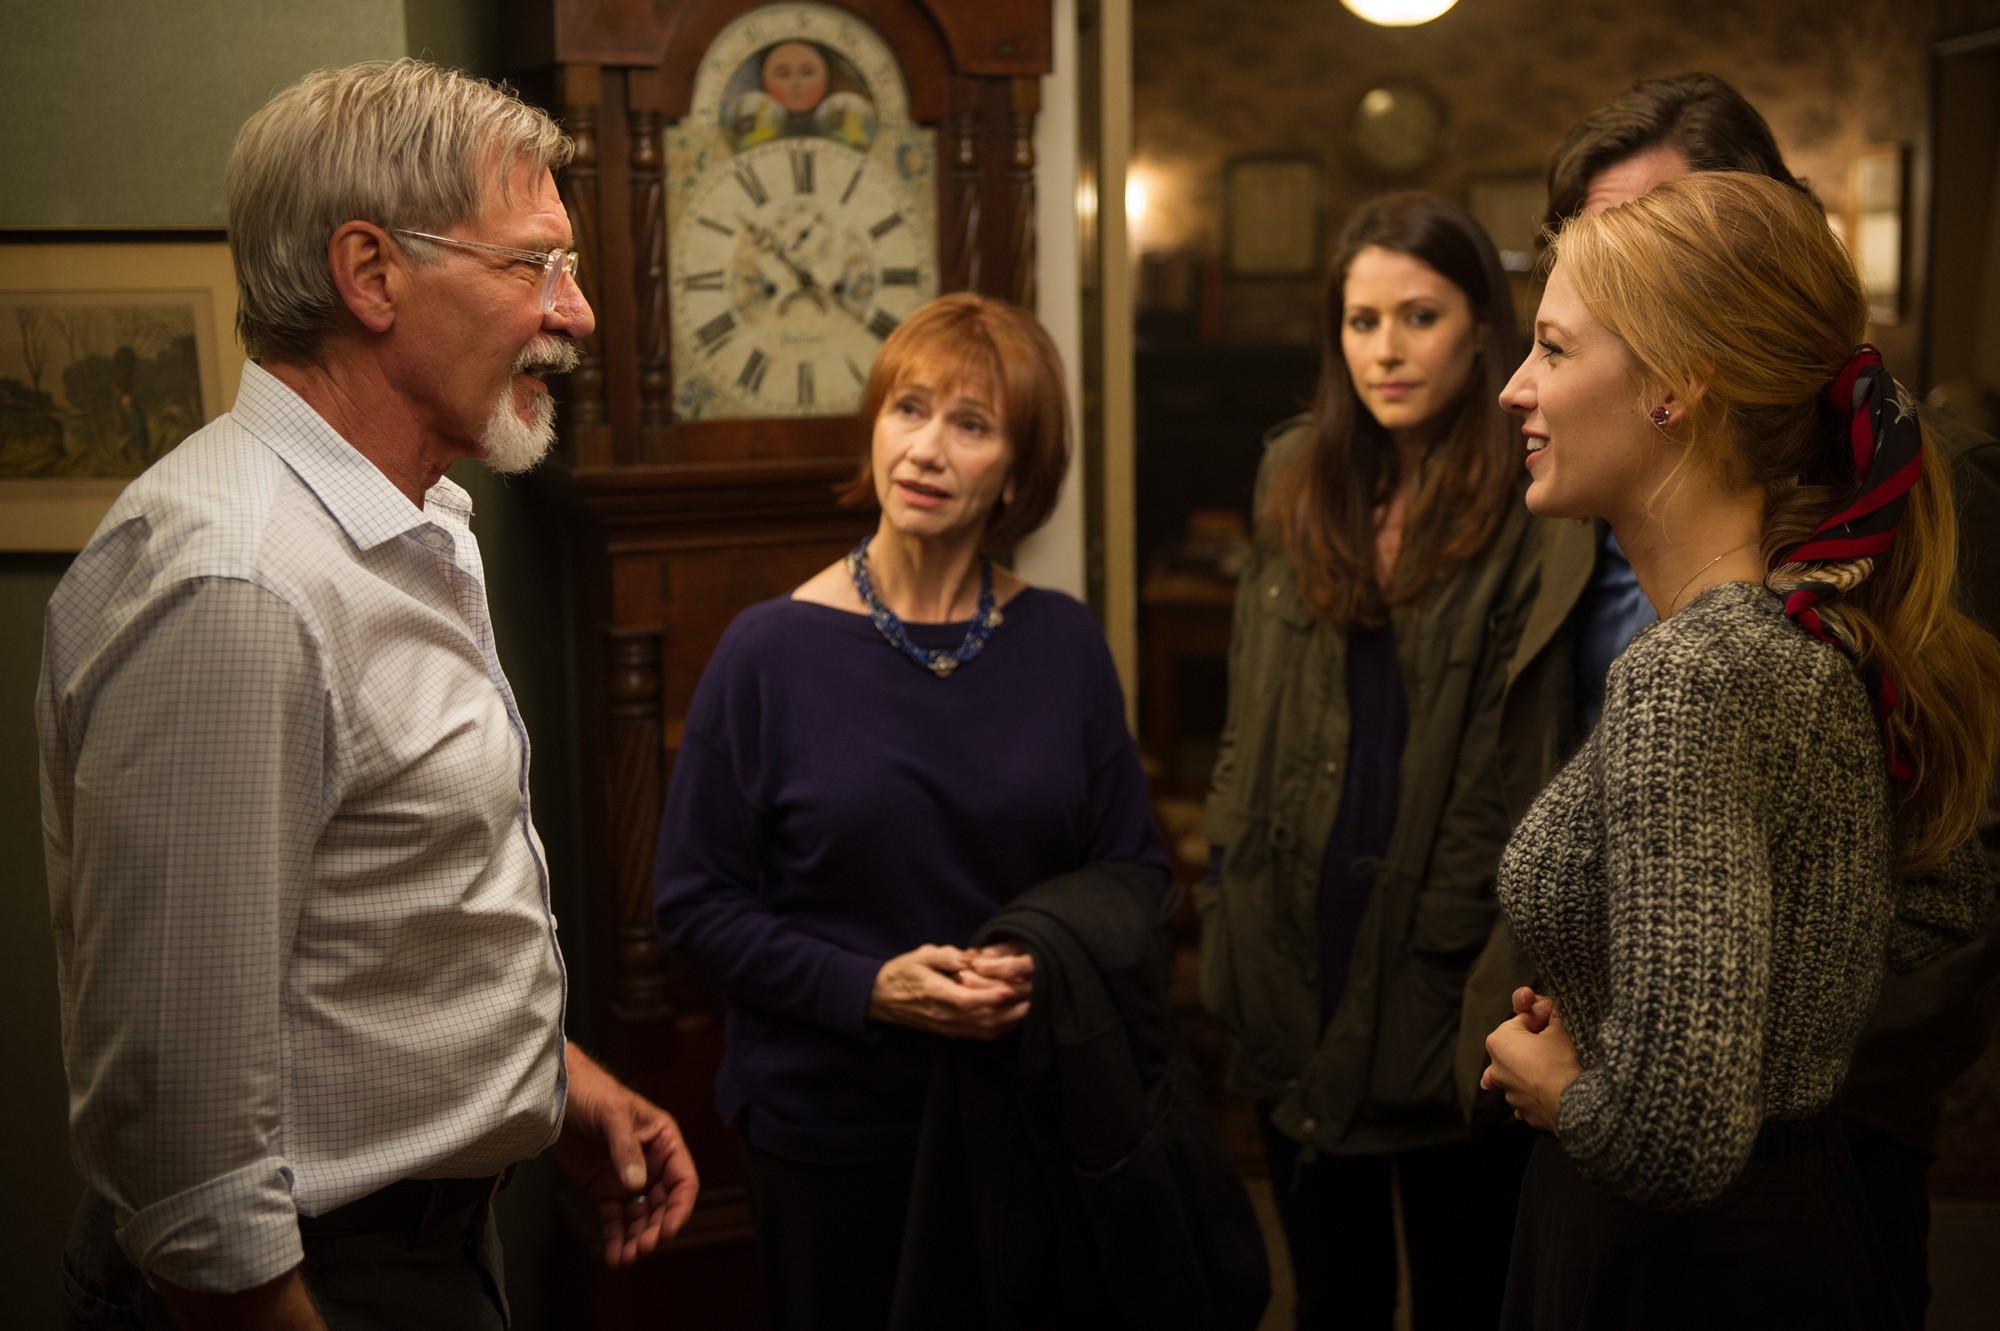 Harrison Ford, Kathy Baker and Blake Lively in Lionsgate Films' The Age of Adaline (2015)